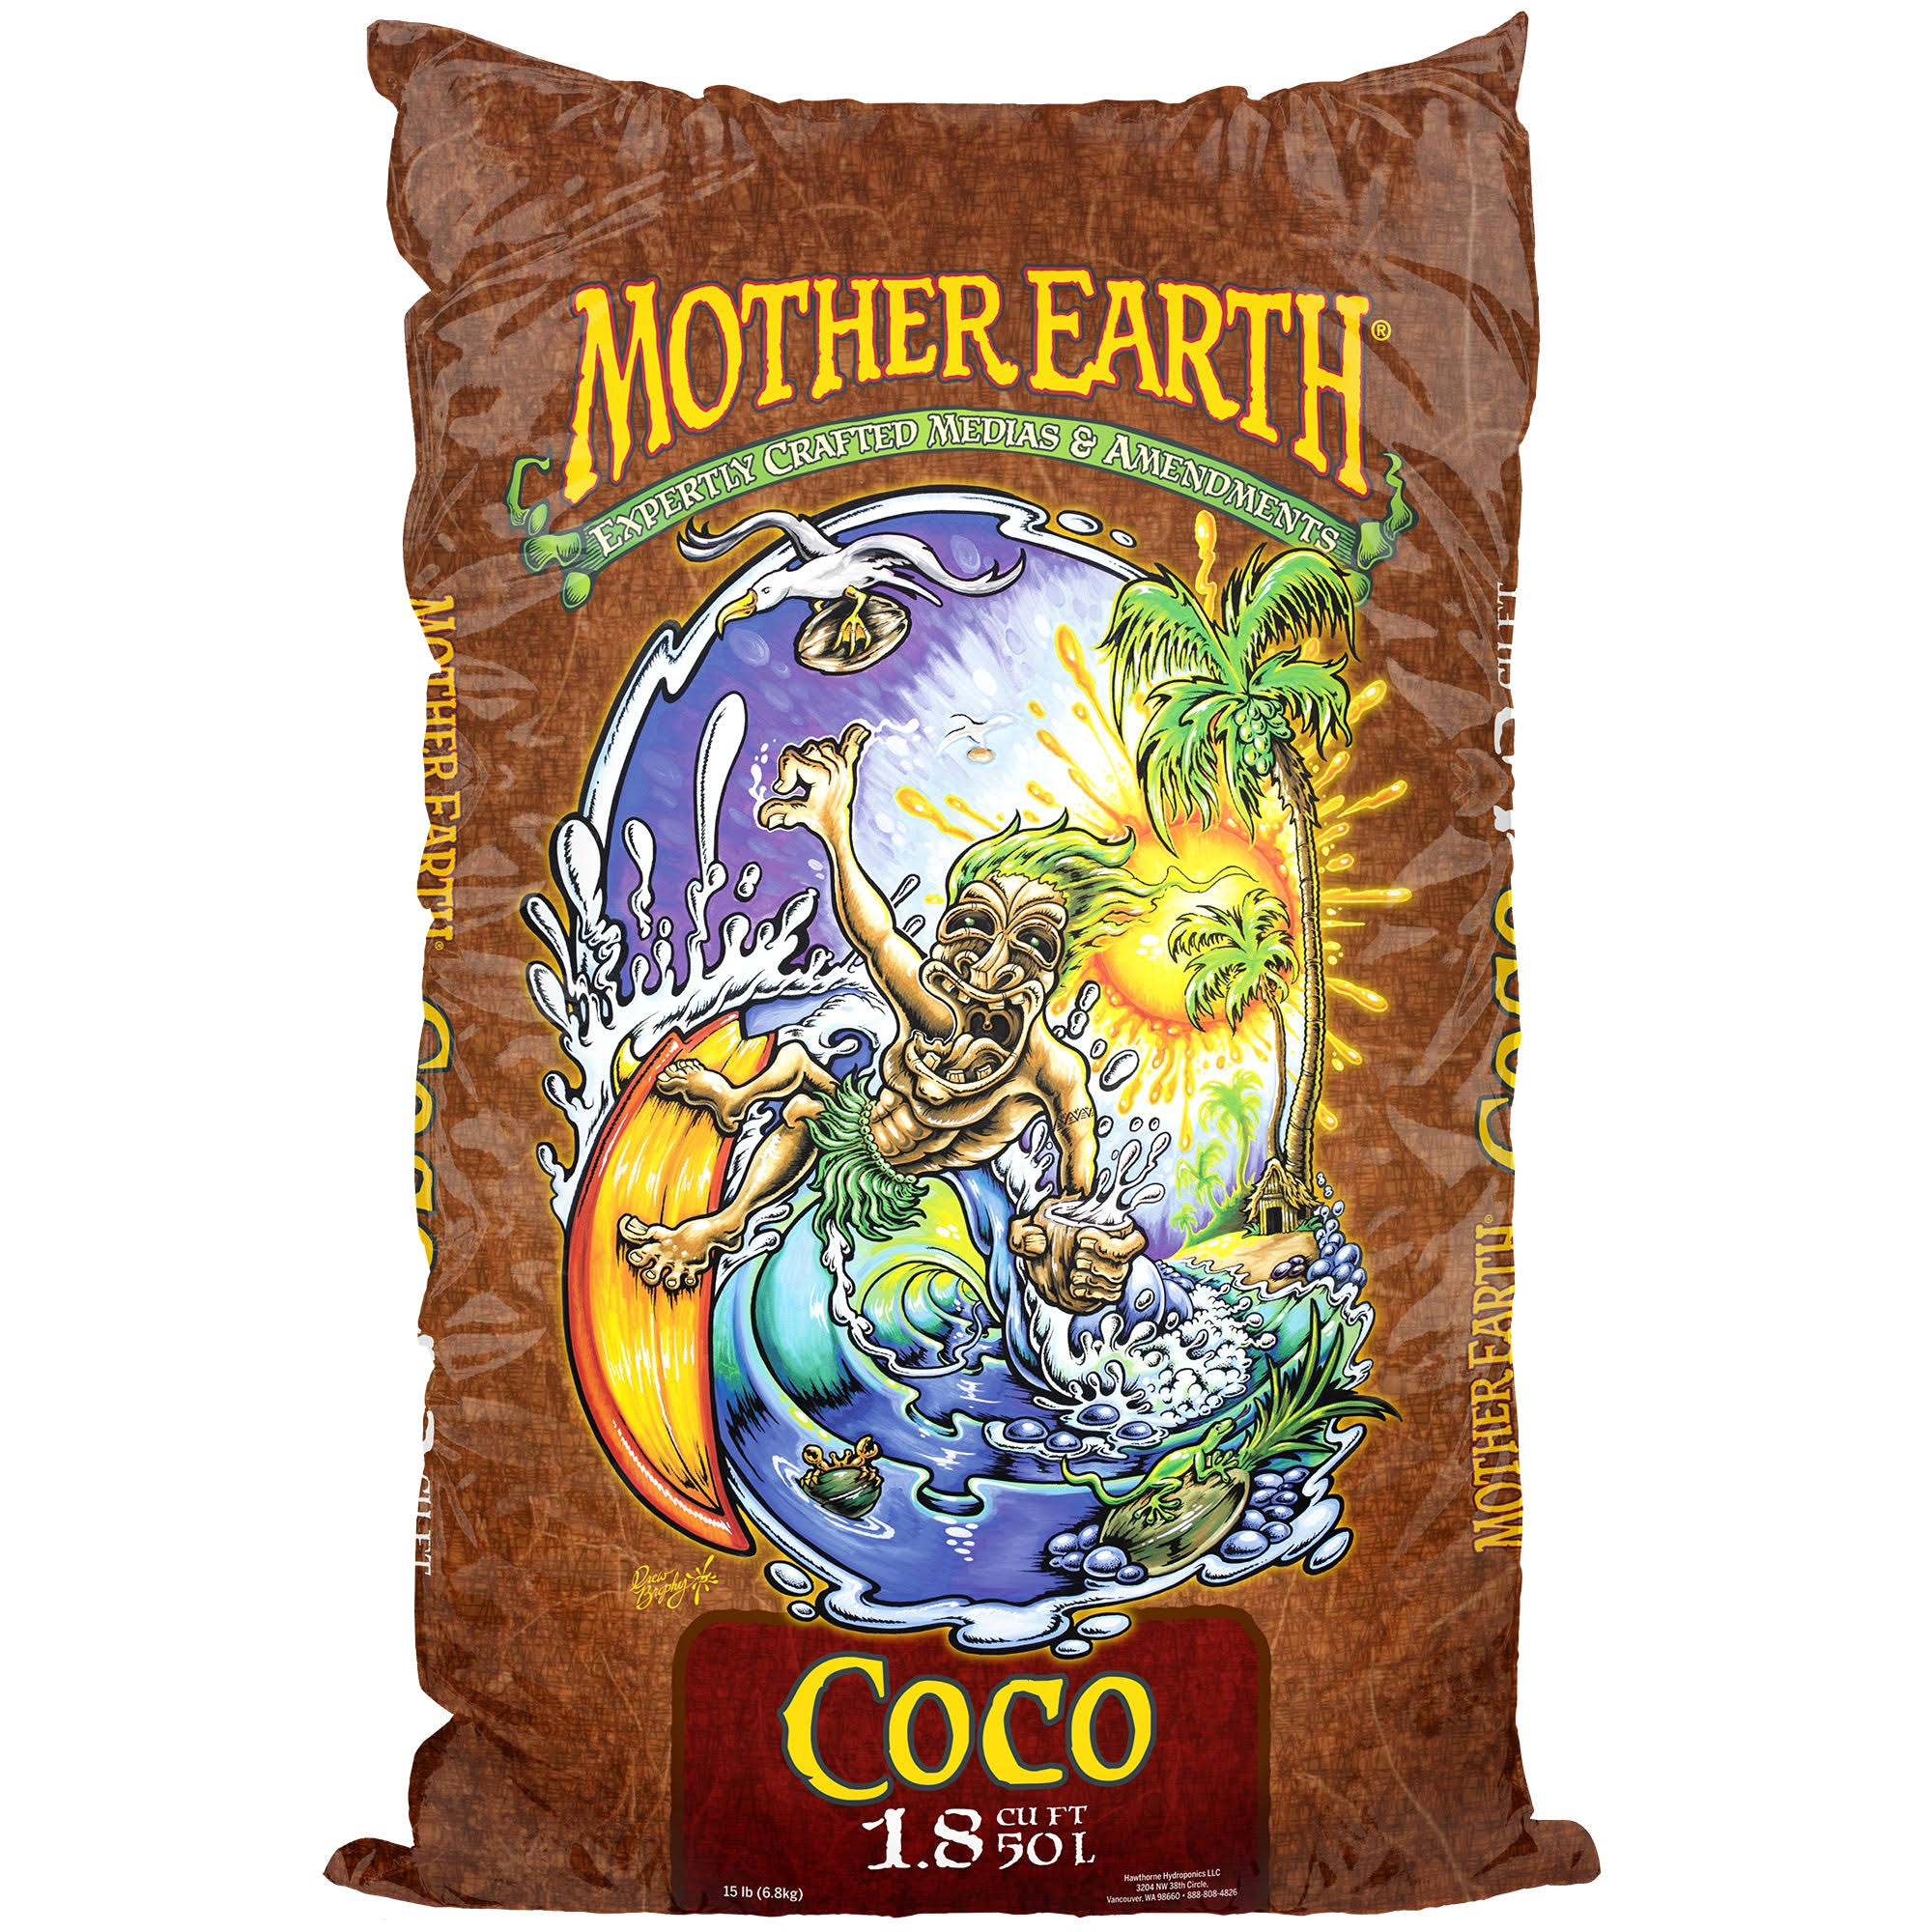 Mother Earth Coco 50L Bag